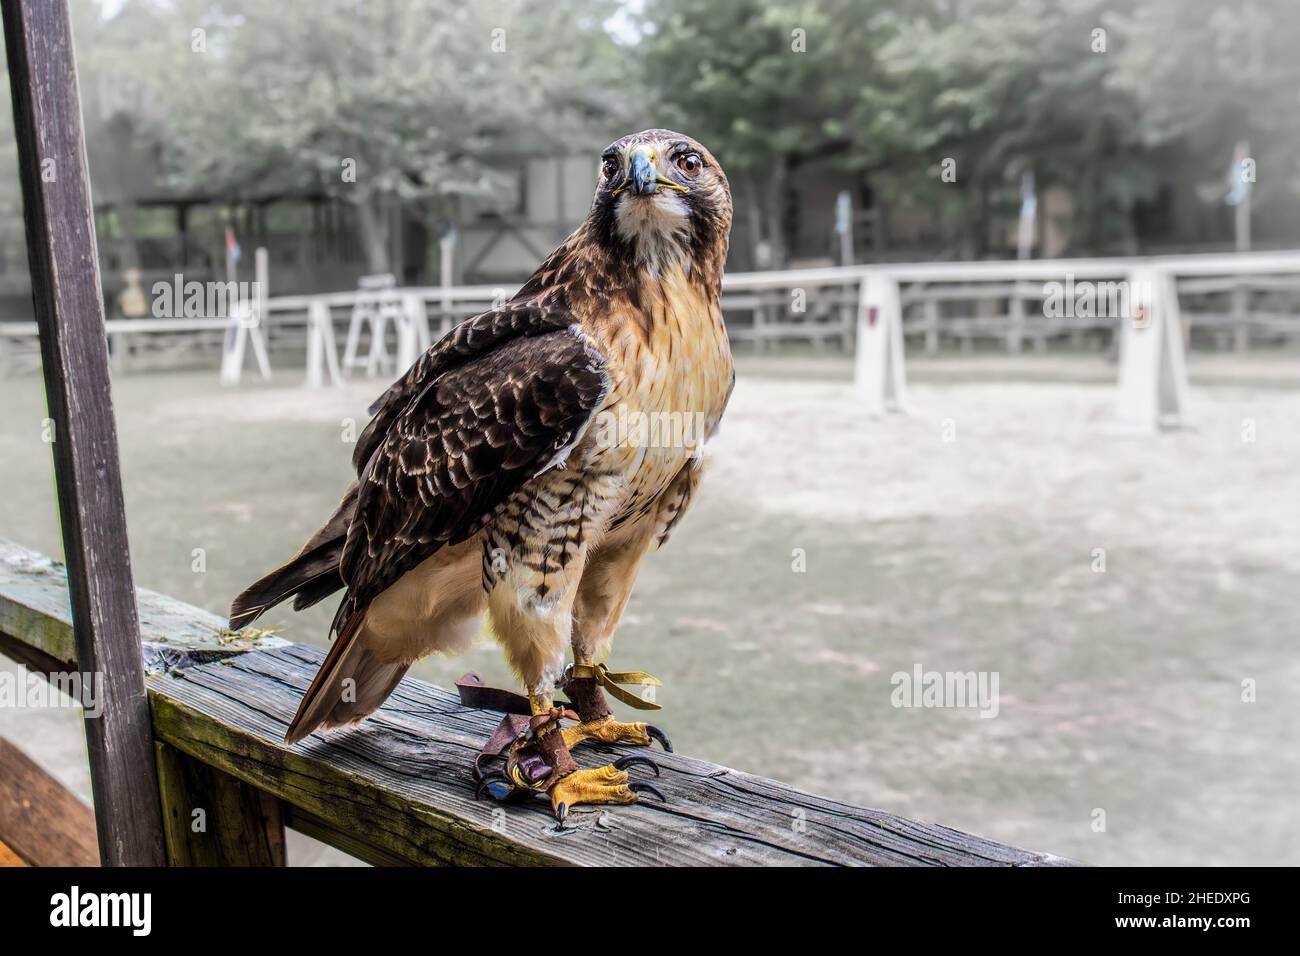 Birds of Prey or Raptors - Hawk trained in Falconry sits of rustic wood fence with Strips of strong leather called jesses on both legs looks alert. Stock Photo